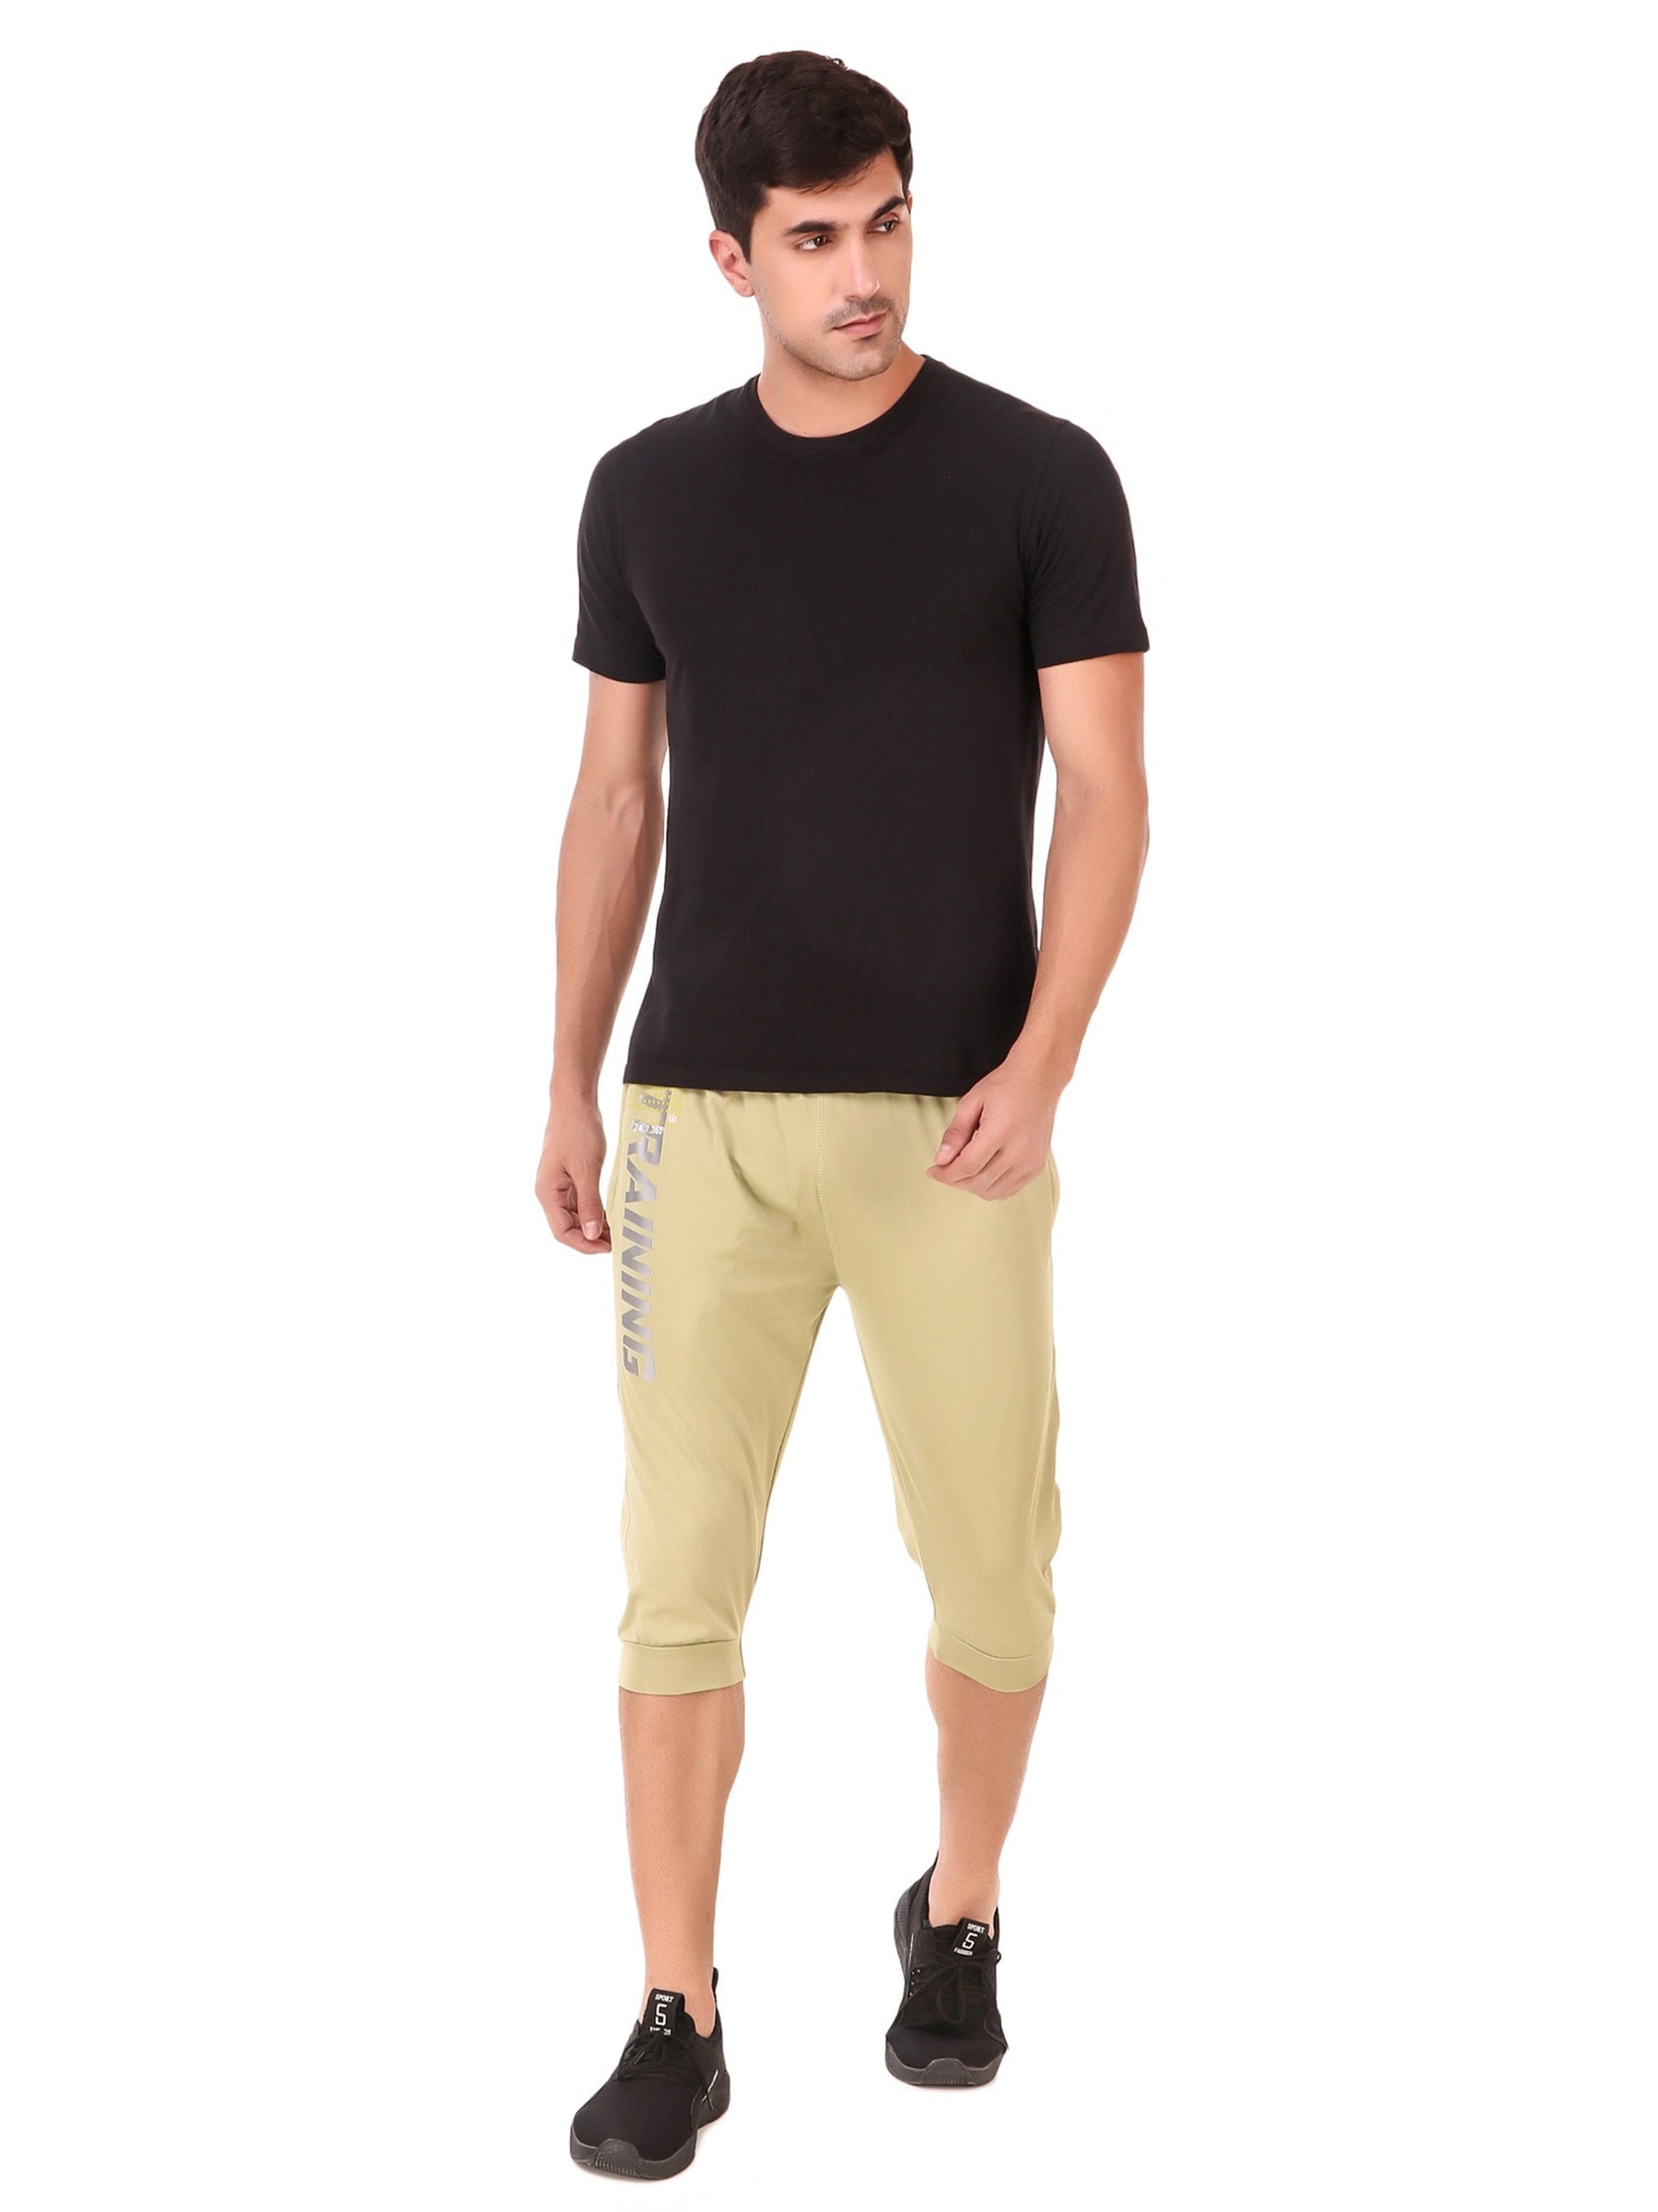 Men's Stretchable Lycra 3/4th Capri with 2 Zippered Pockets for Gym, Yoga, Workout and Casual Wear